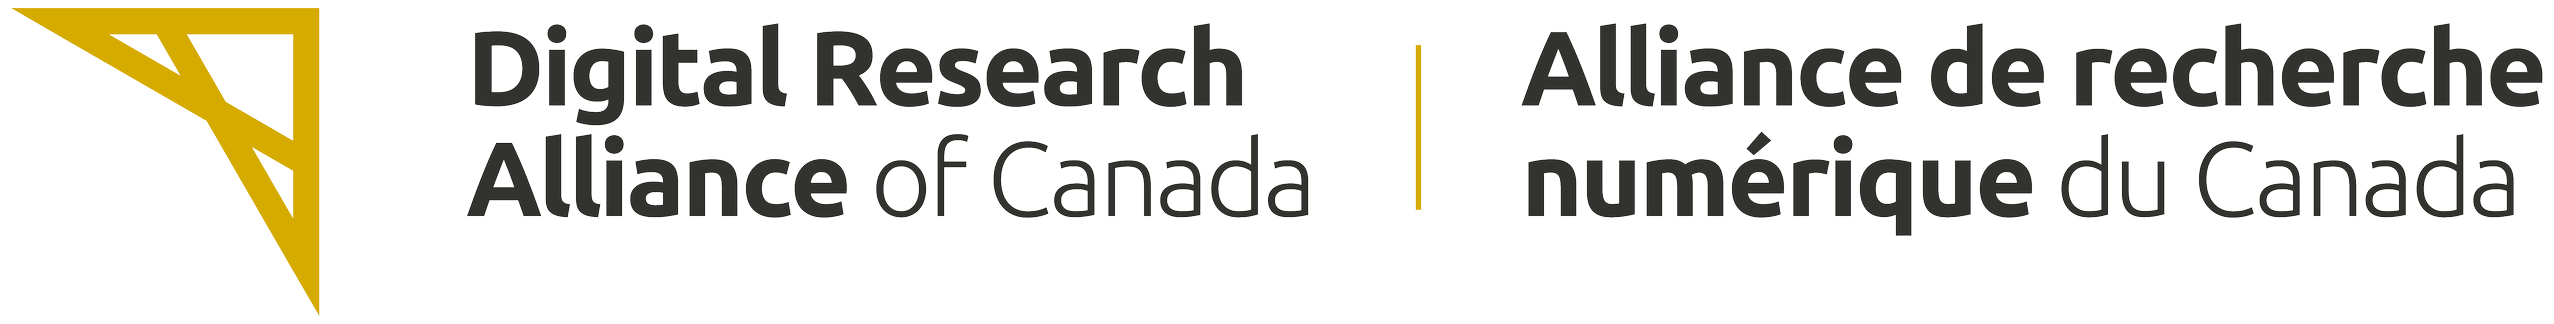 Digital Research Alliance of Canada banner